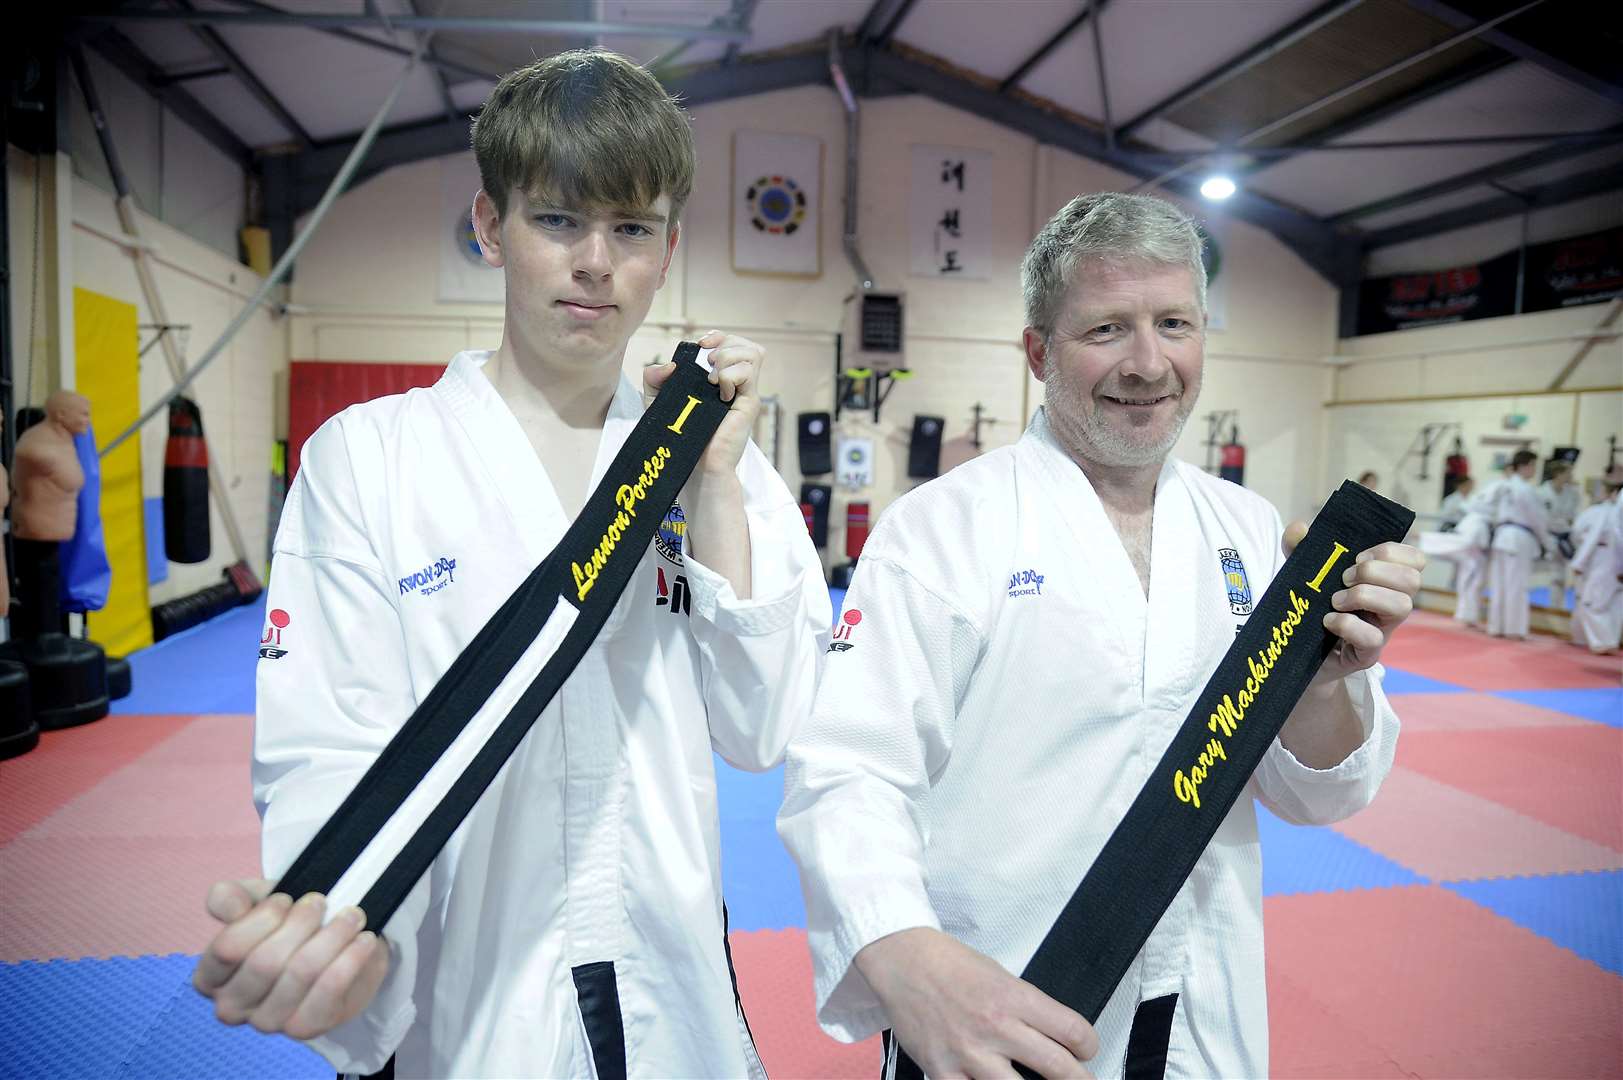 Lennon Porter and Gary Mackintosh who recently gained their black belts.